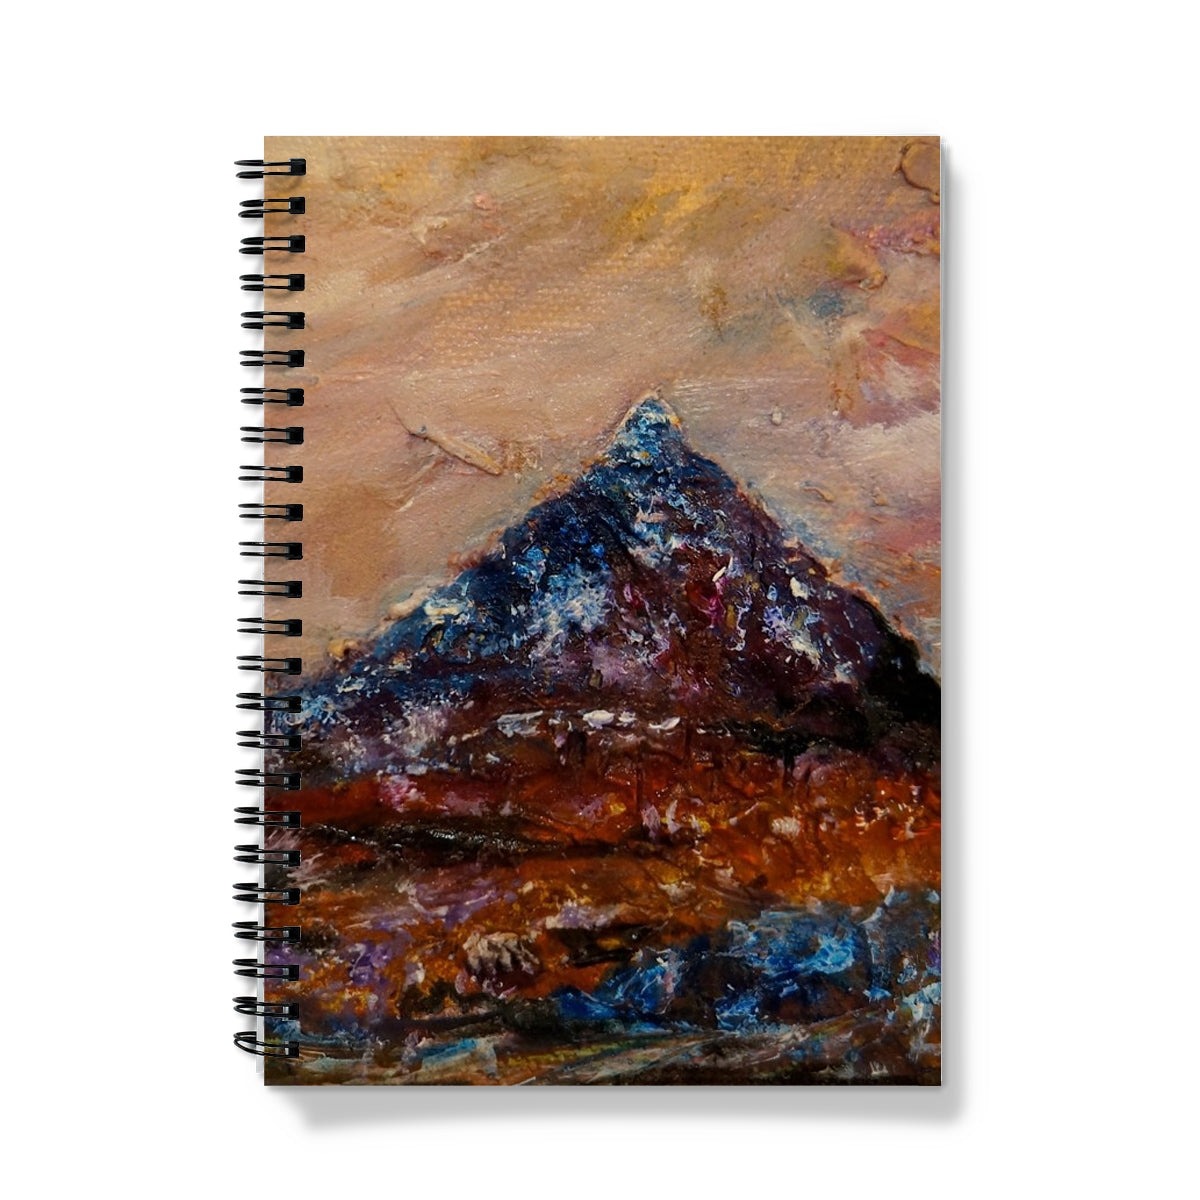 Buachaille Etive Mòr Art Gifts Notebook-Journals & Notebooks-Glencoe Art Gallery-A4-Lined-Paintings, Prints, Homeware, Art Gifts From Scotland By Scottish Artist Kevin Hunter